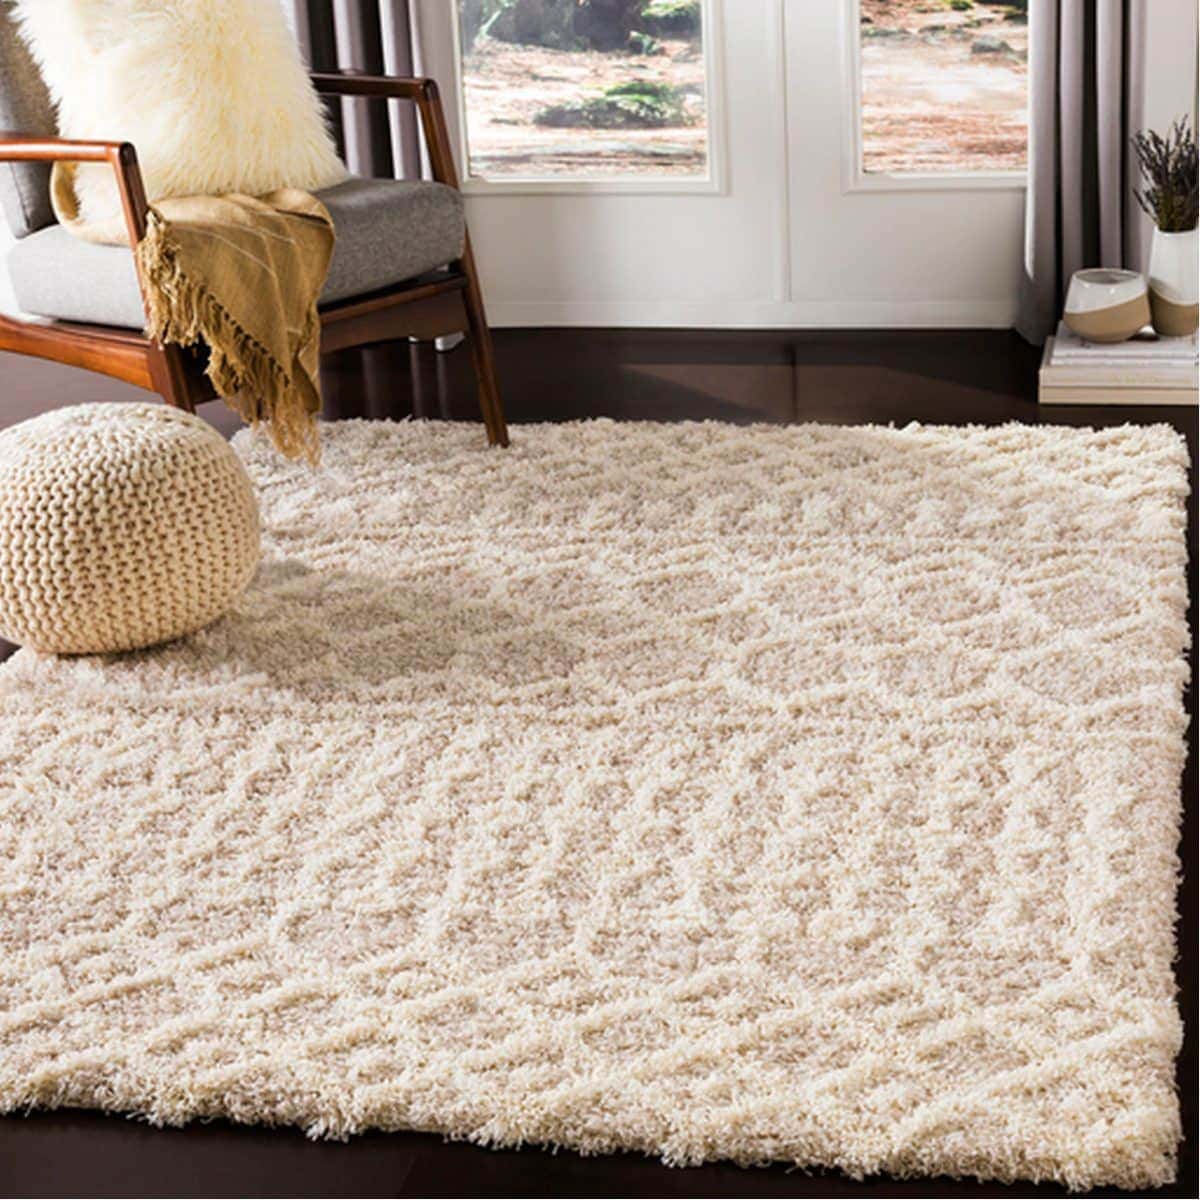 3 Add Texture With A Bohemian Area Rug 1200x1200 